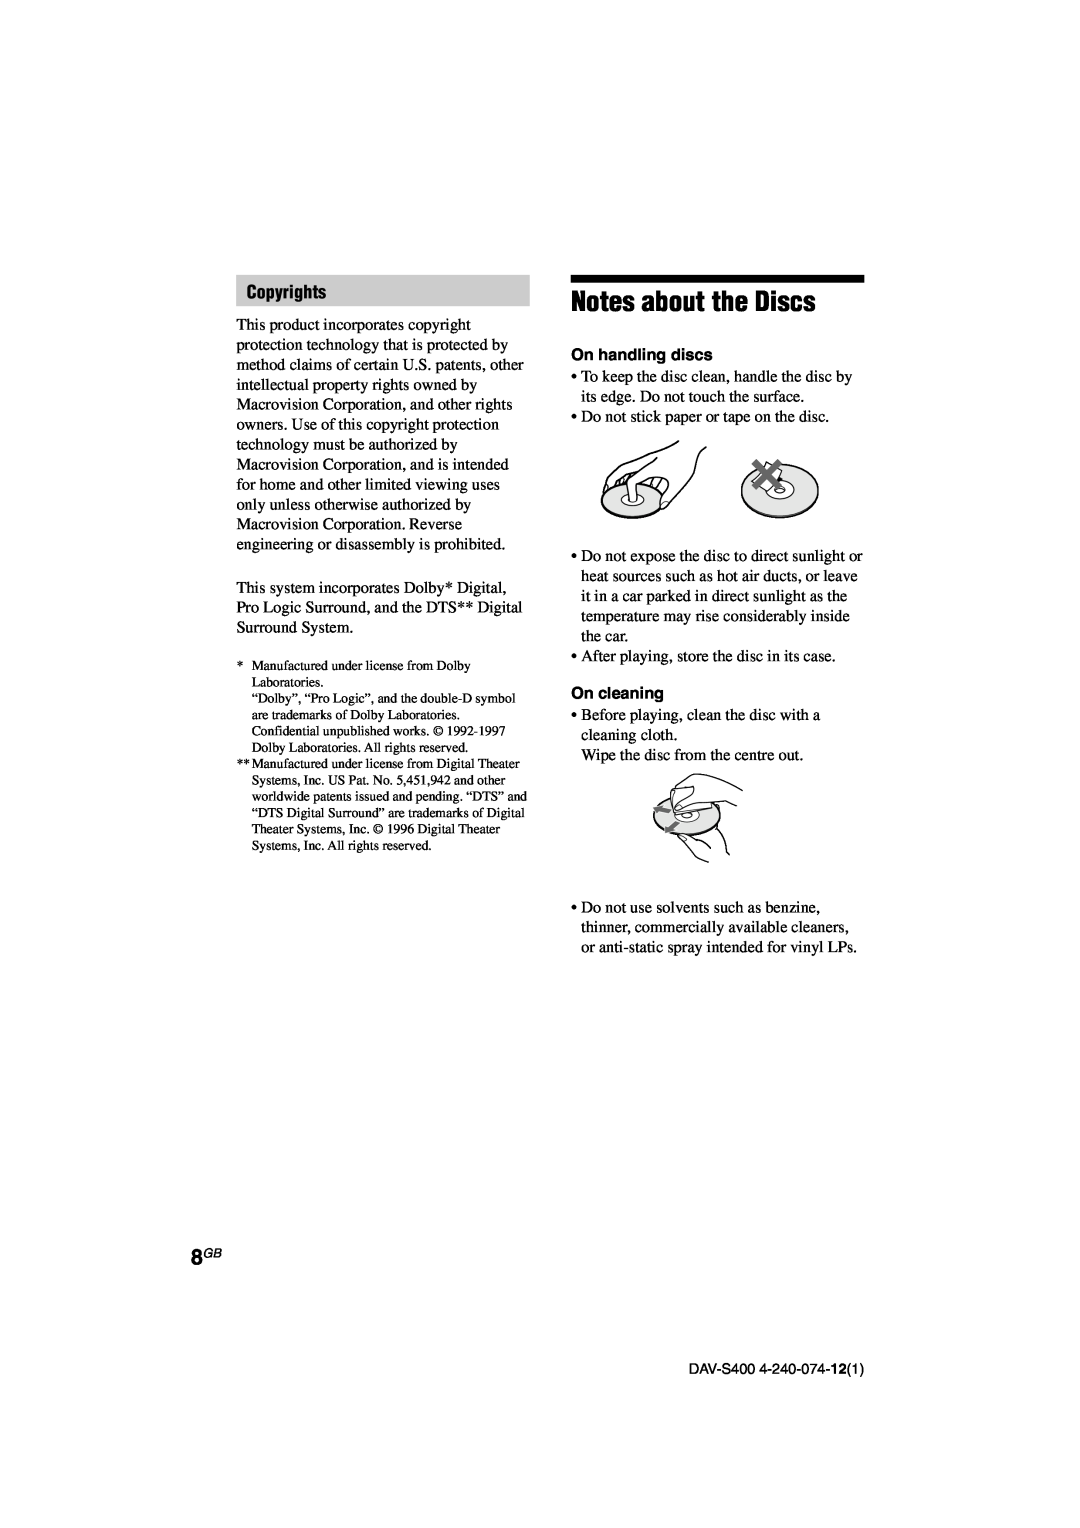 Sony DAV-S400 manual Notes about the Discs, Copyrights, On handling discs, On cleaning 